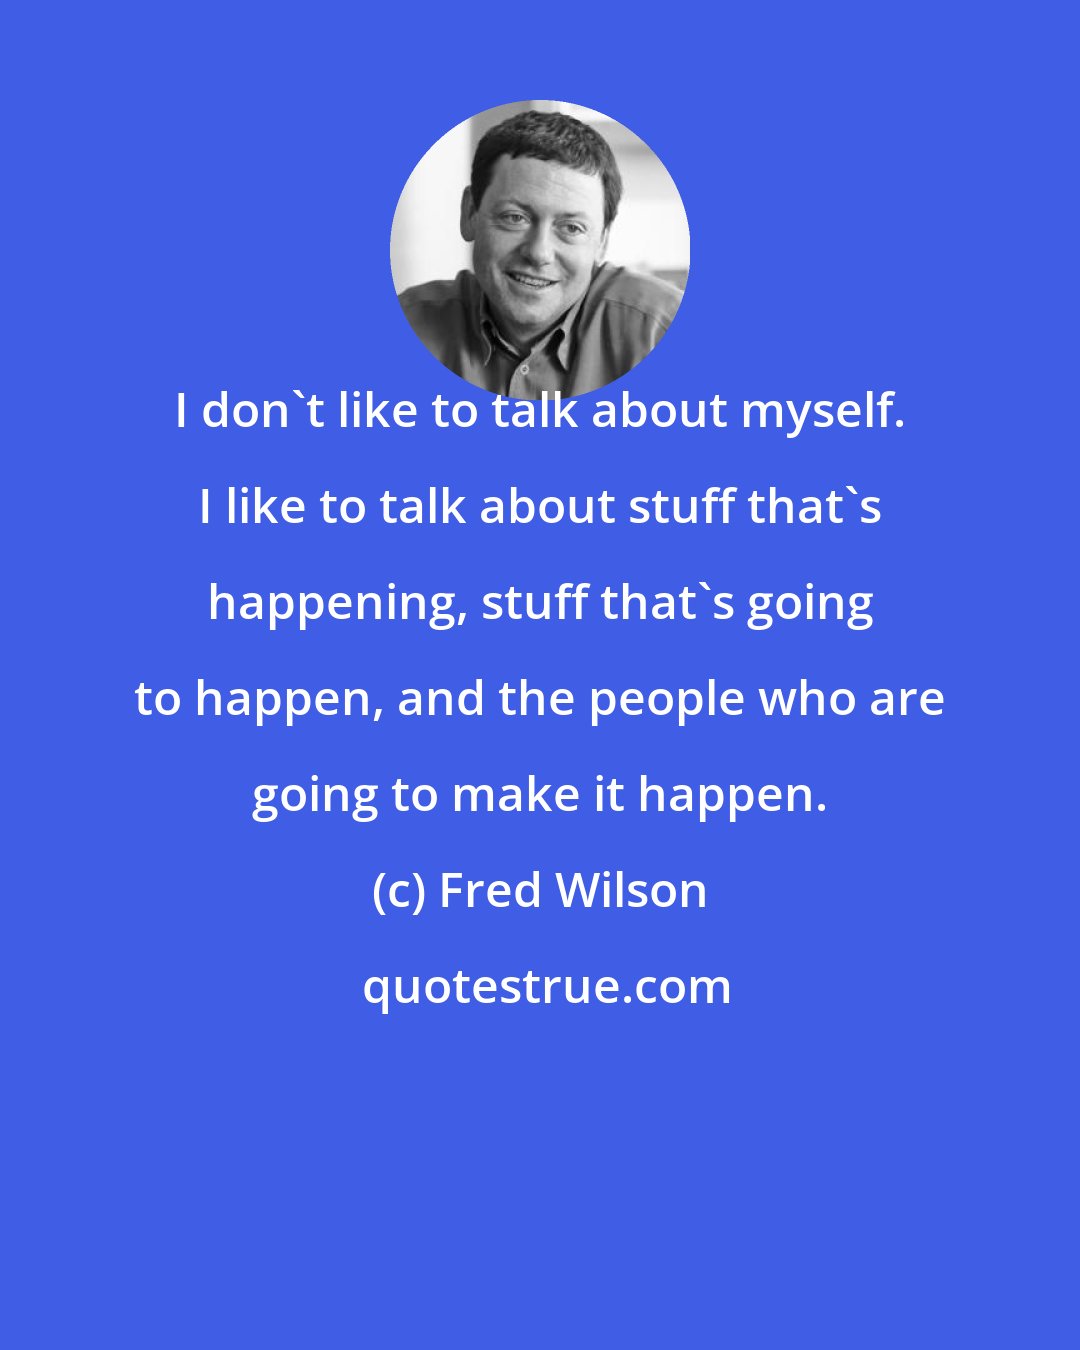 Fred Wilson: I don't like to talk about myself. I like to talk about stuff that's happening, stuff that's going to happen, and the people who are going to make it happen.